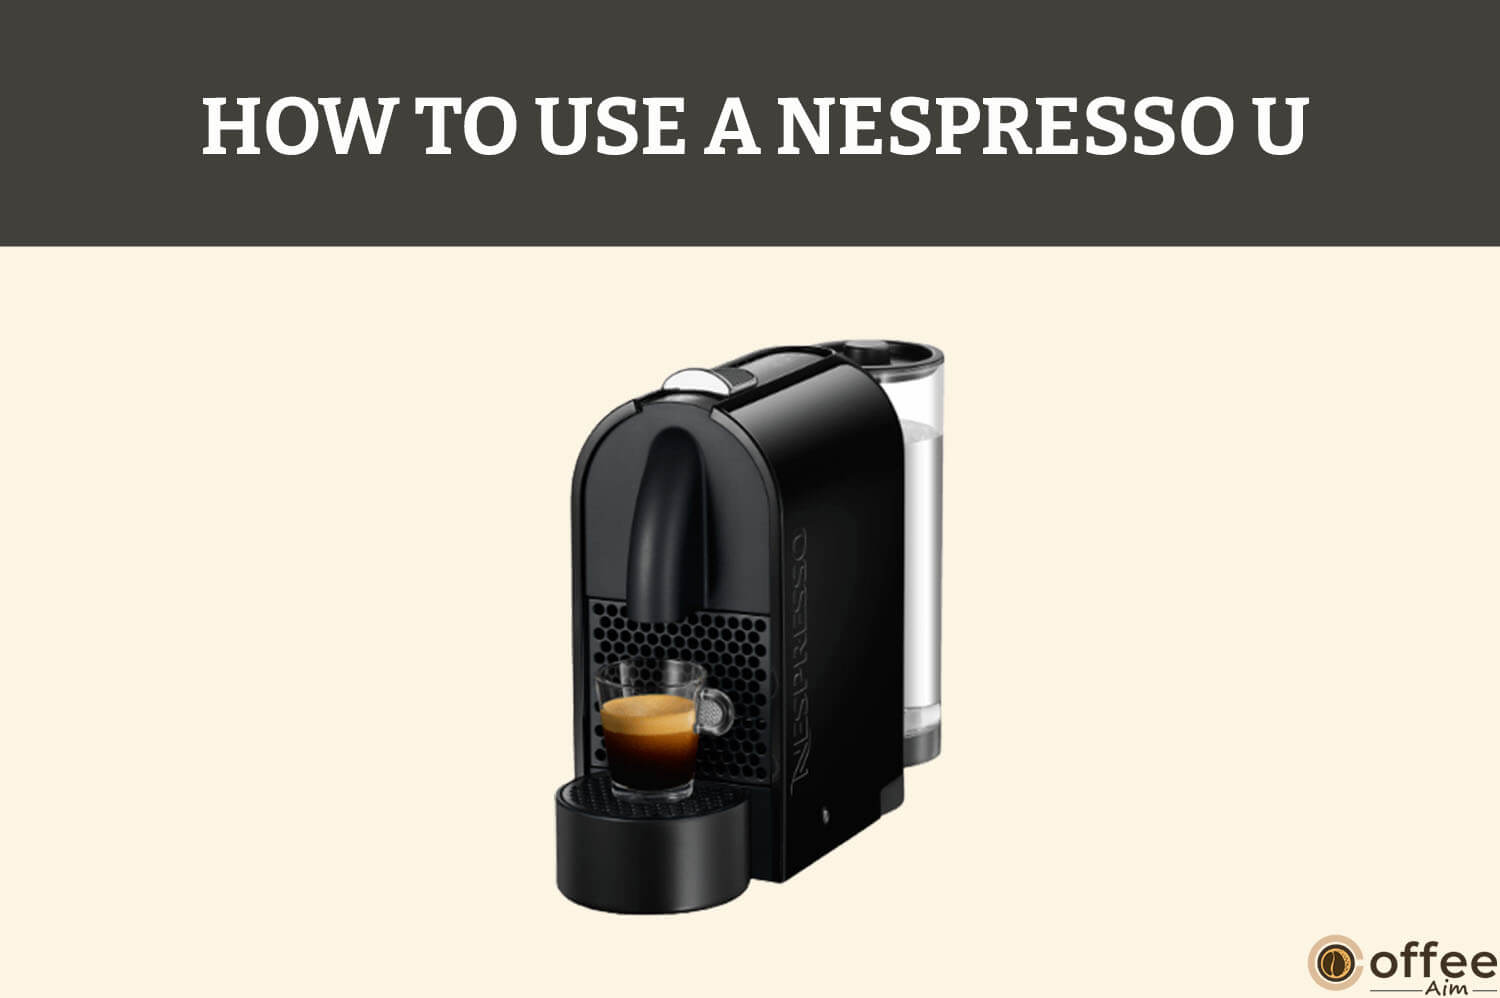 Featured image for the article "How to Use A Nespresso U"